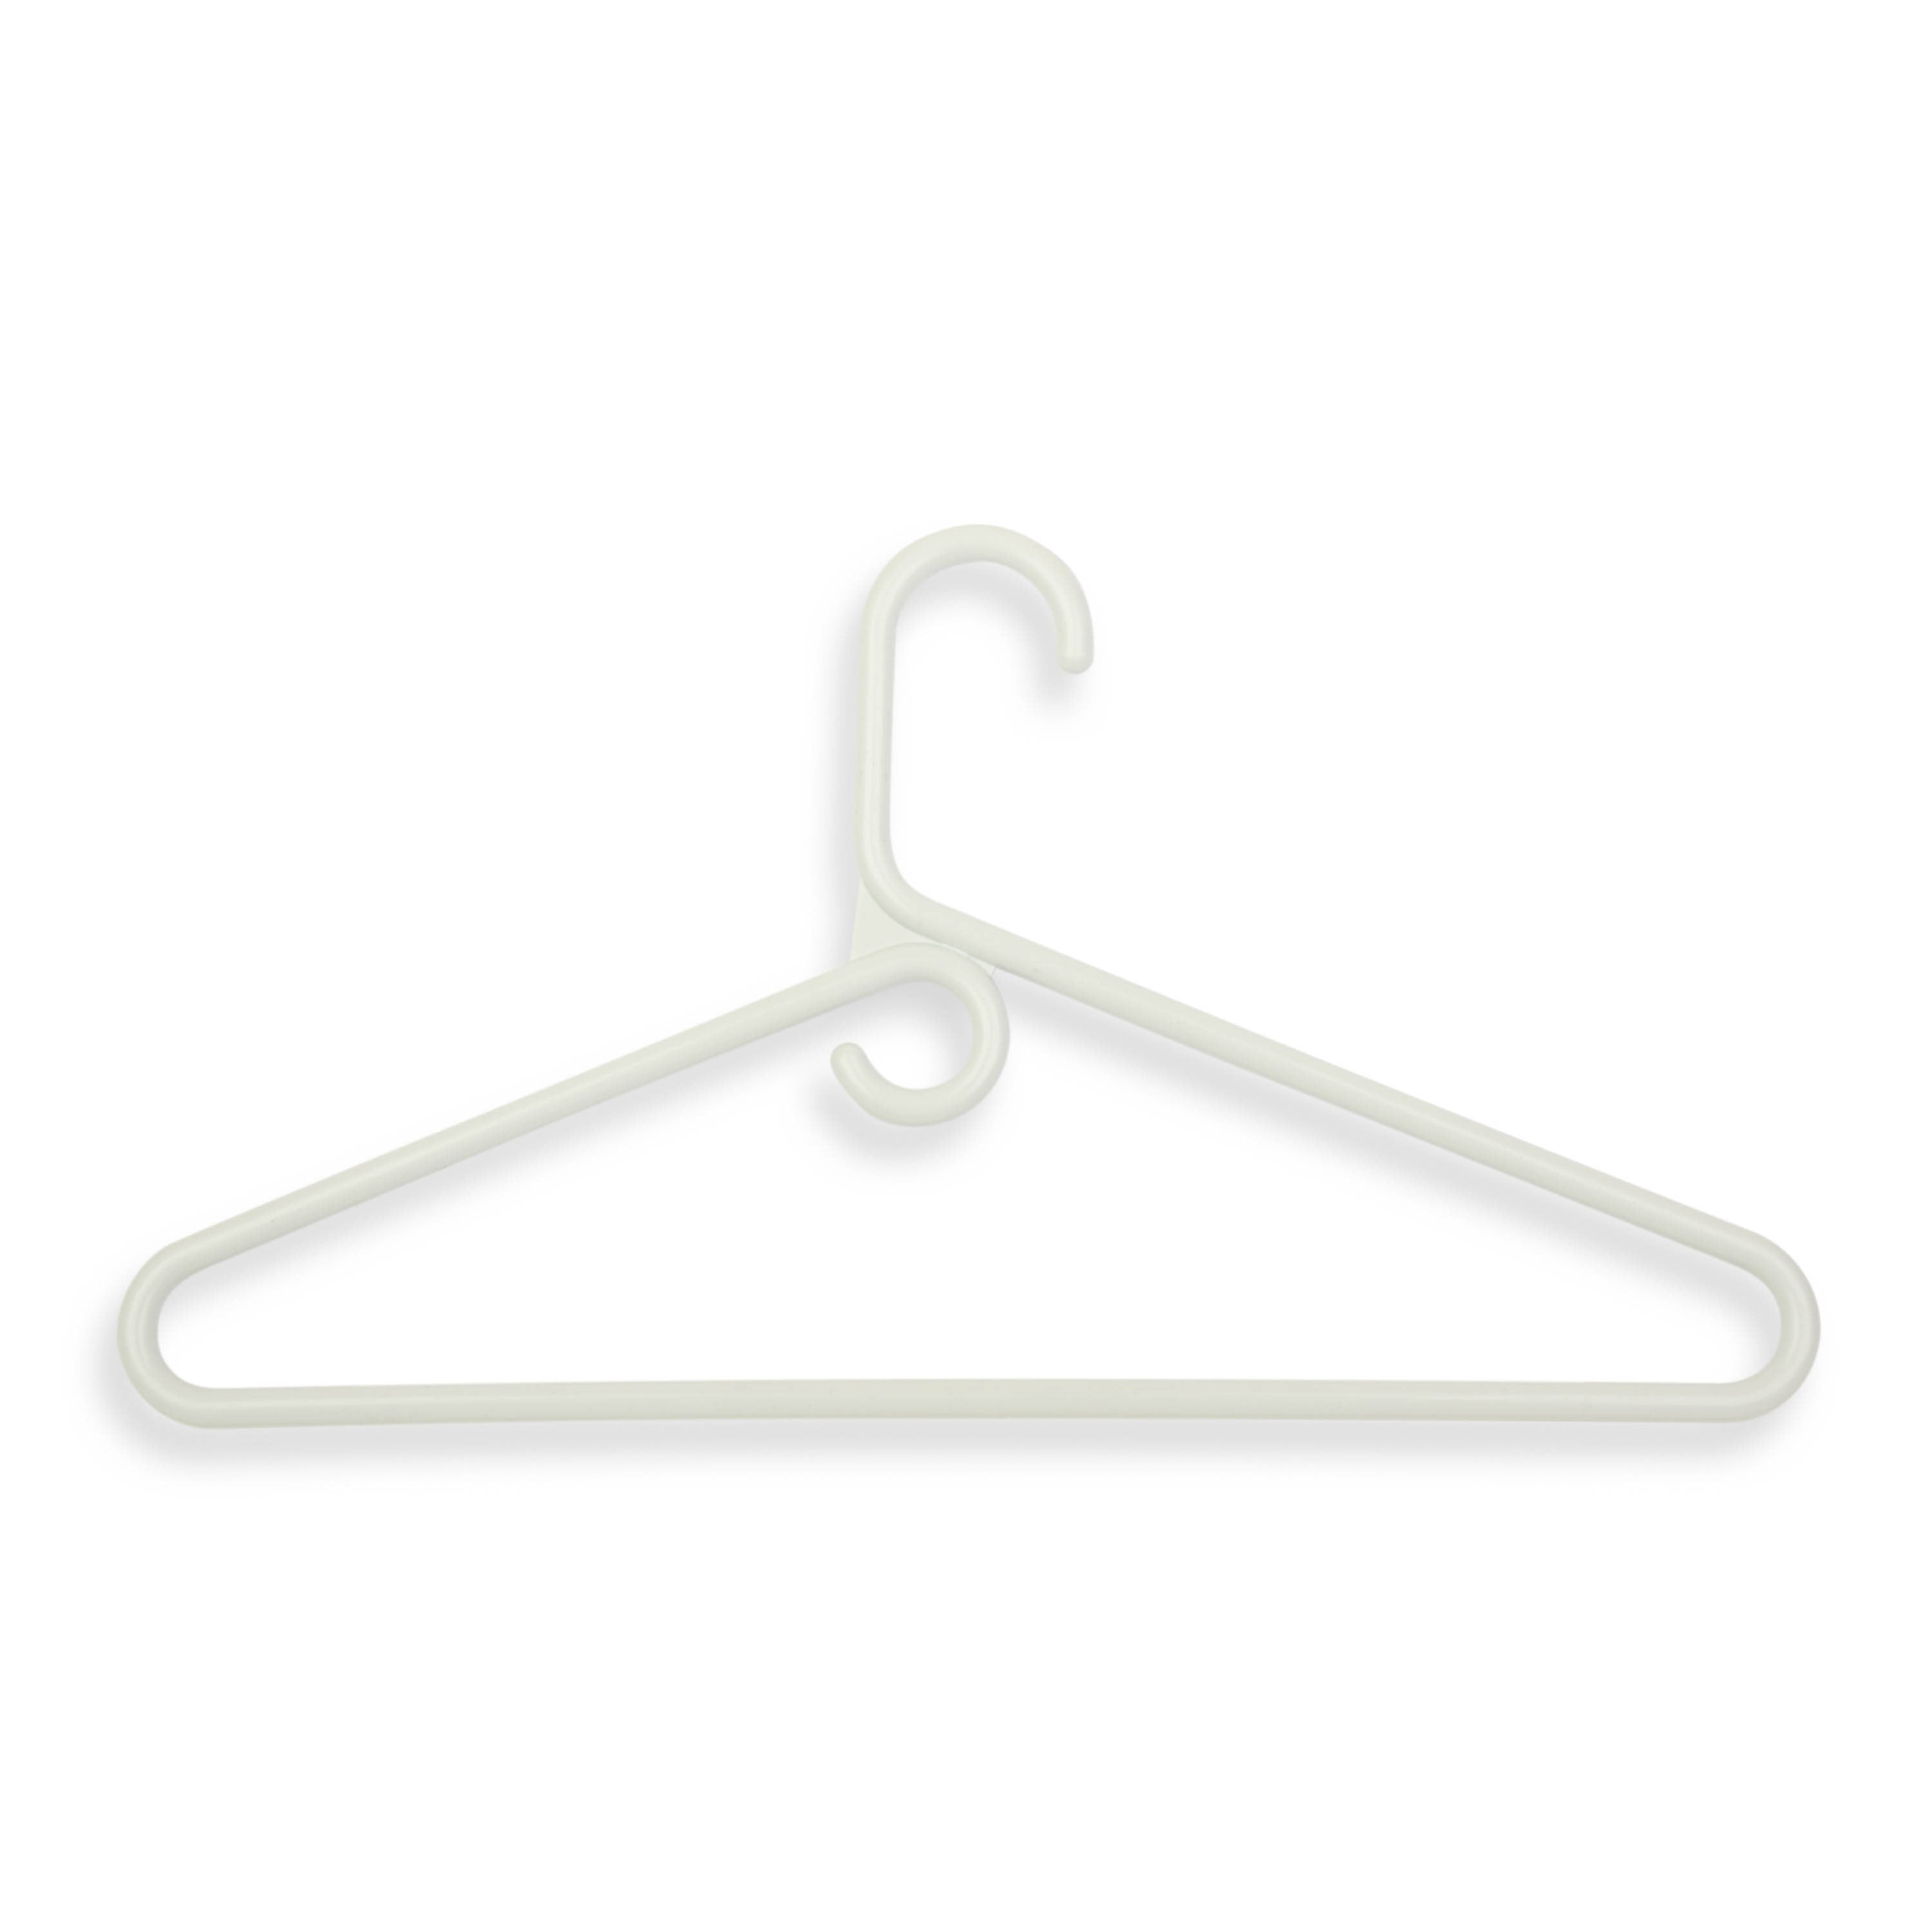 OSTO Gray Plastic Hangers 20-Pack OP-107-20-GRY-H - The Home Depot